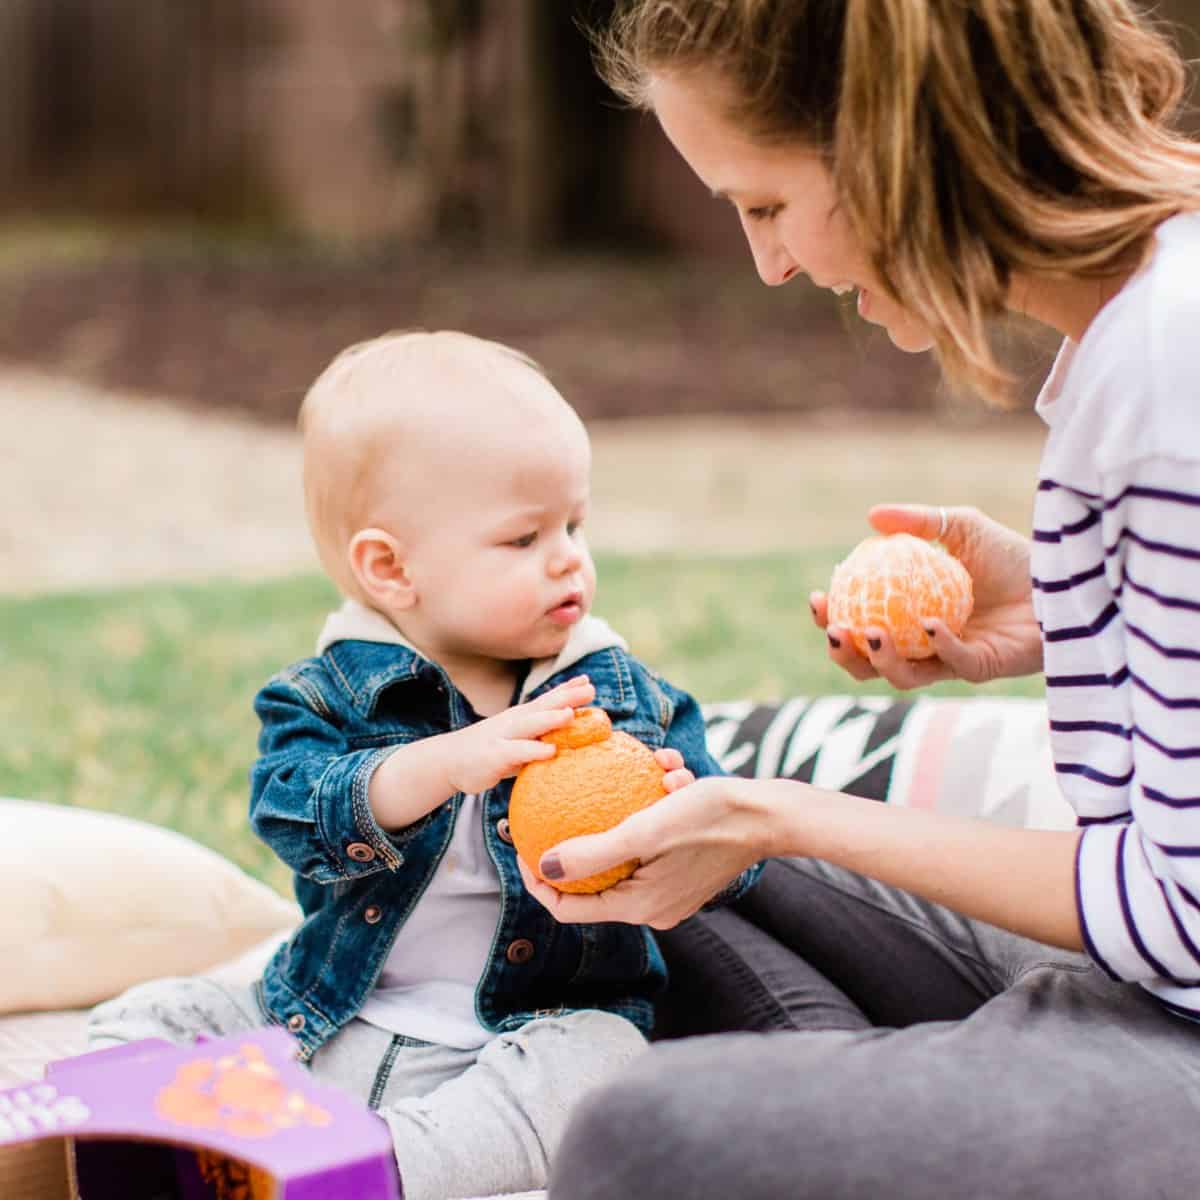 Plant based mom Michelle Cehn holding out a sumo citrus orange as a vegan snack for her kid toddler.